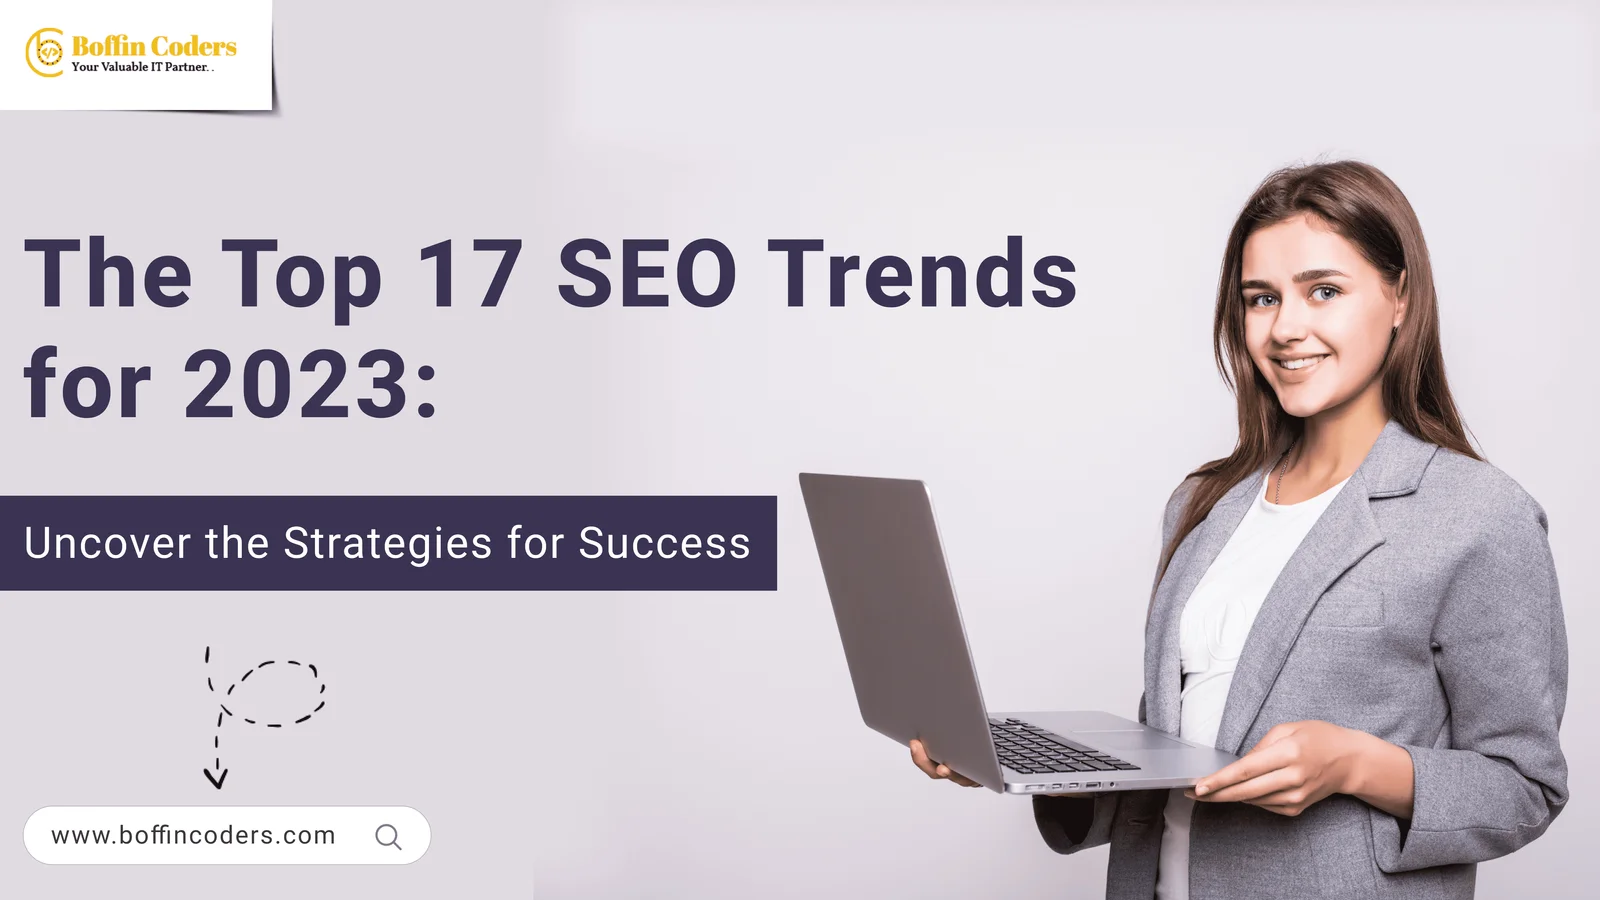 The-Top-17-SEO-Trends-for-2023-Uncover-the-Strategies-for-Success-1